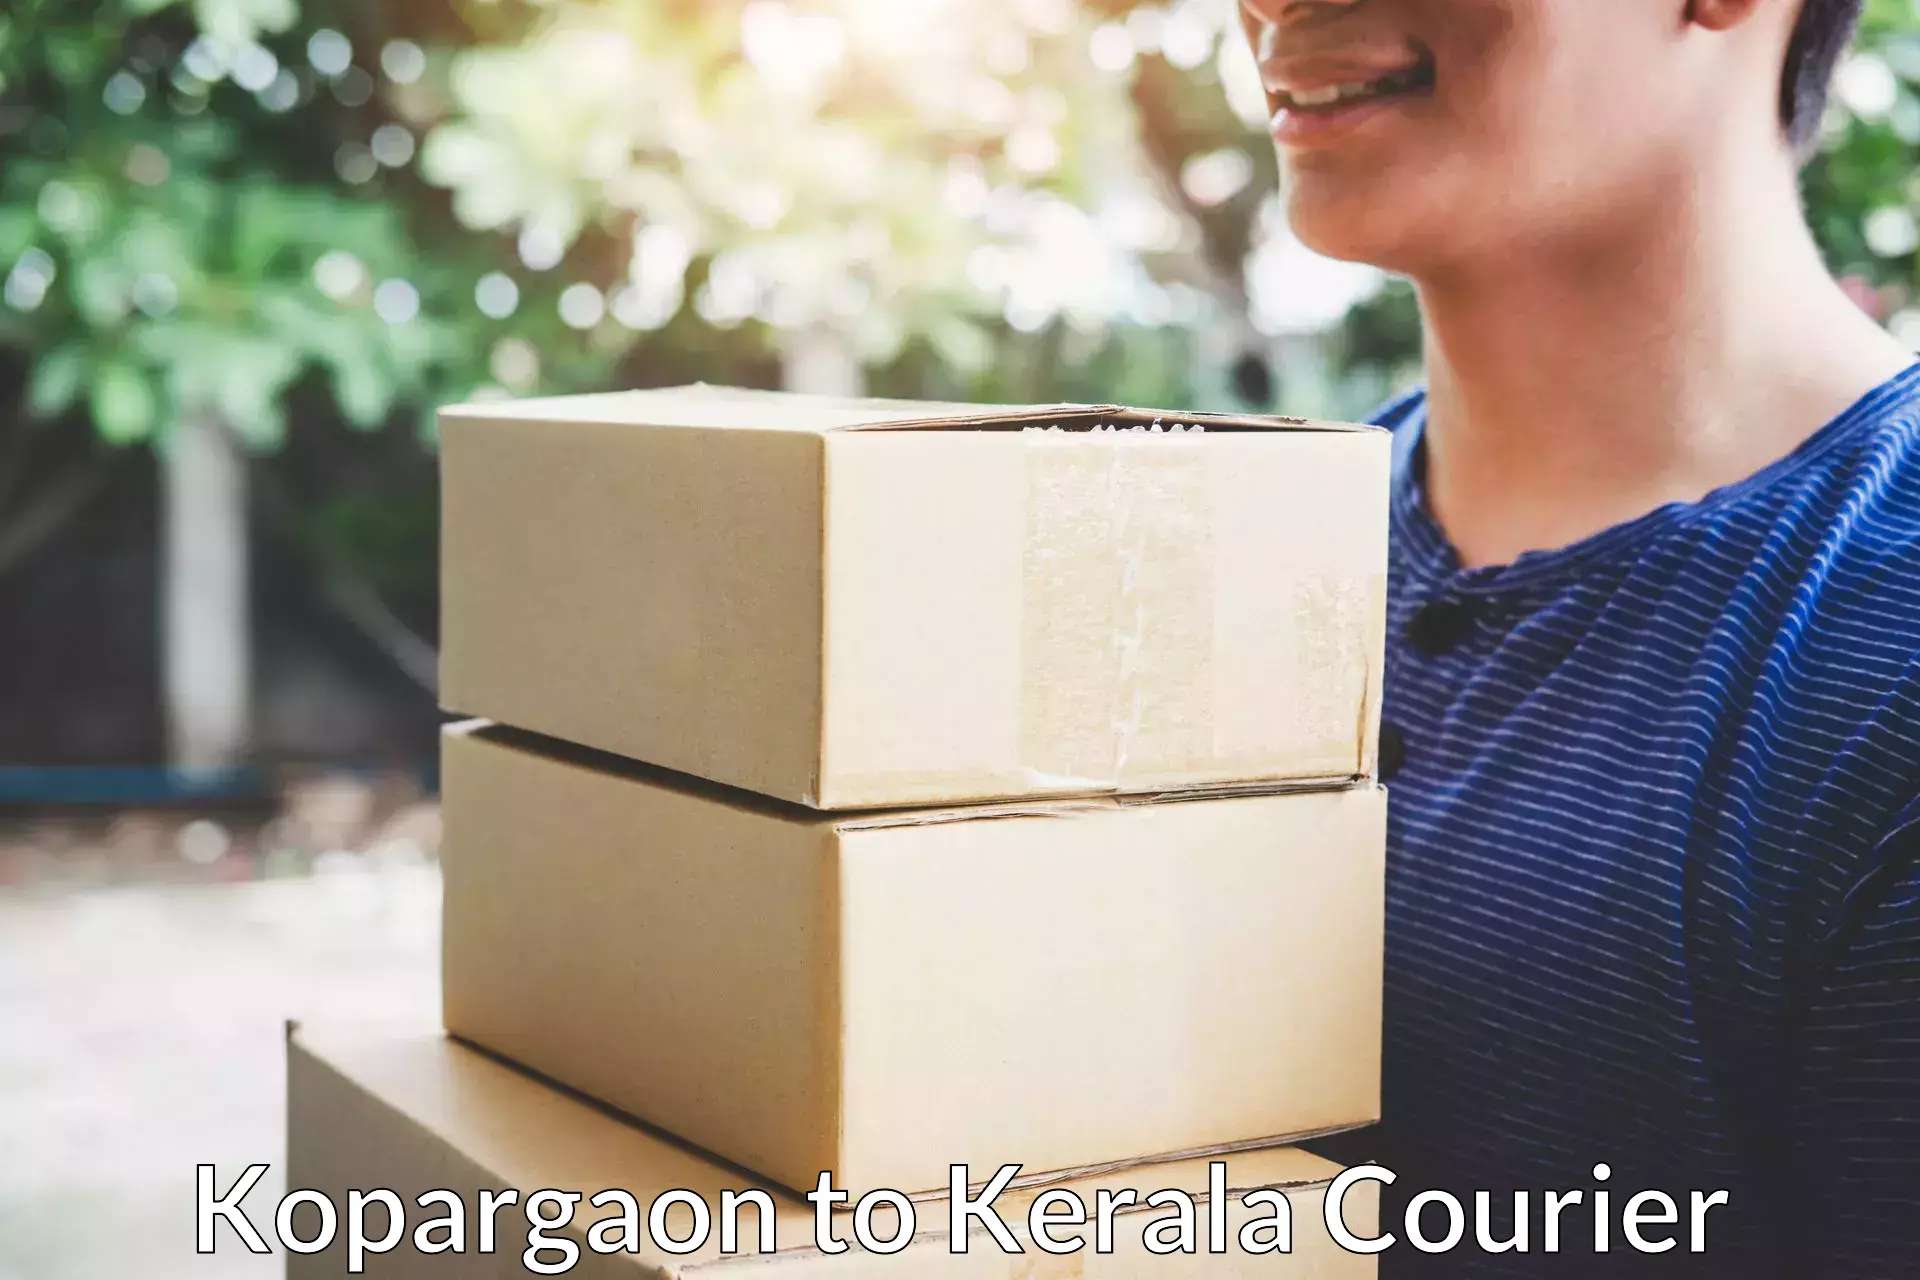 Full-service movers Kopargaon to Cochin University of Science and Technology